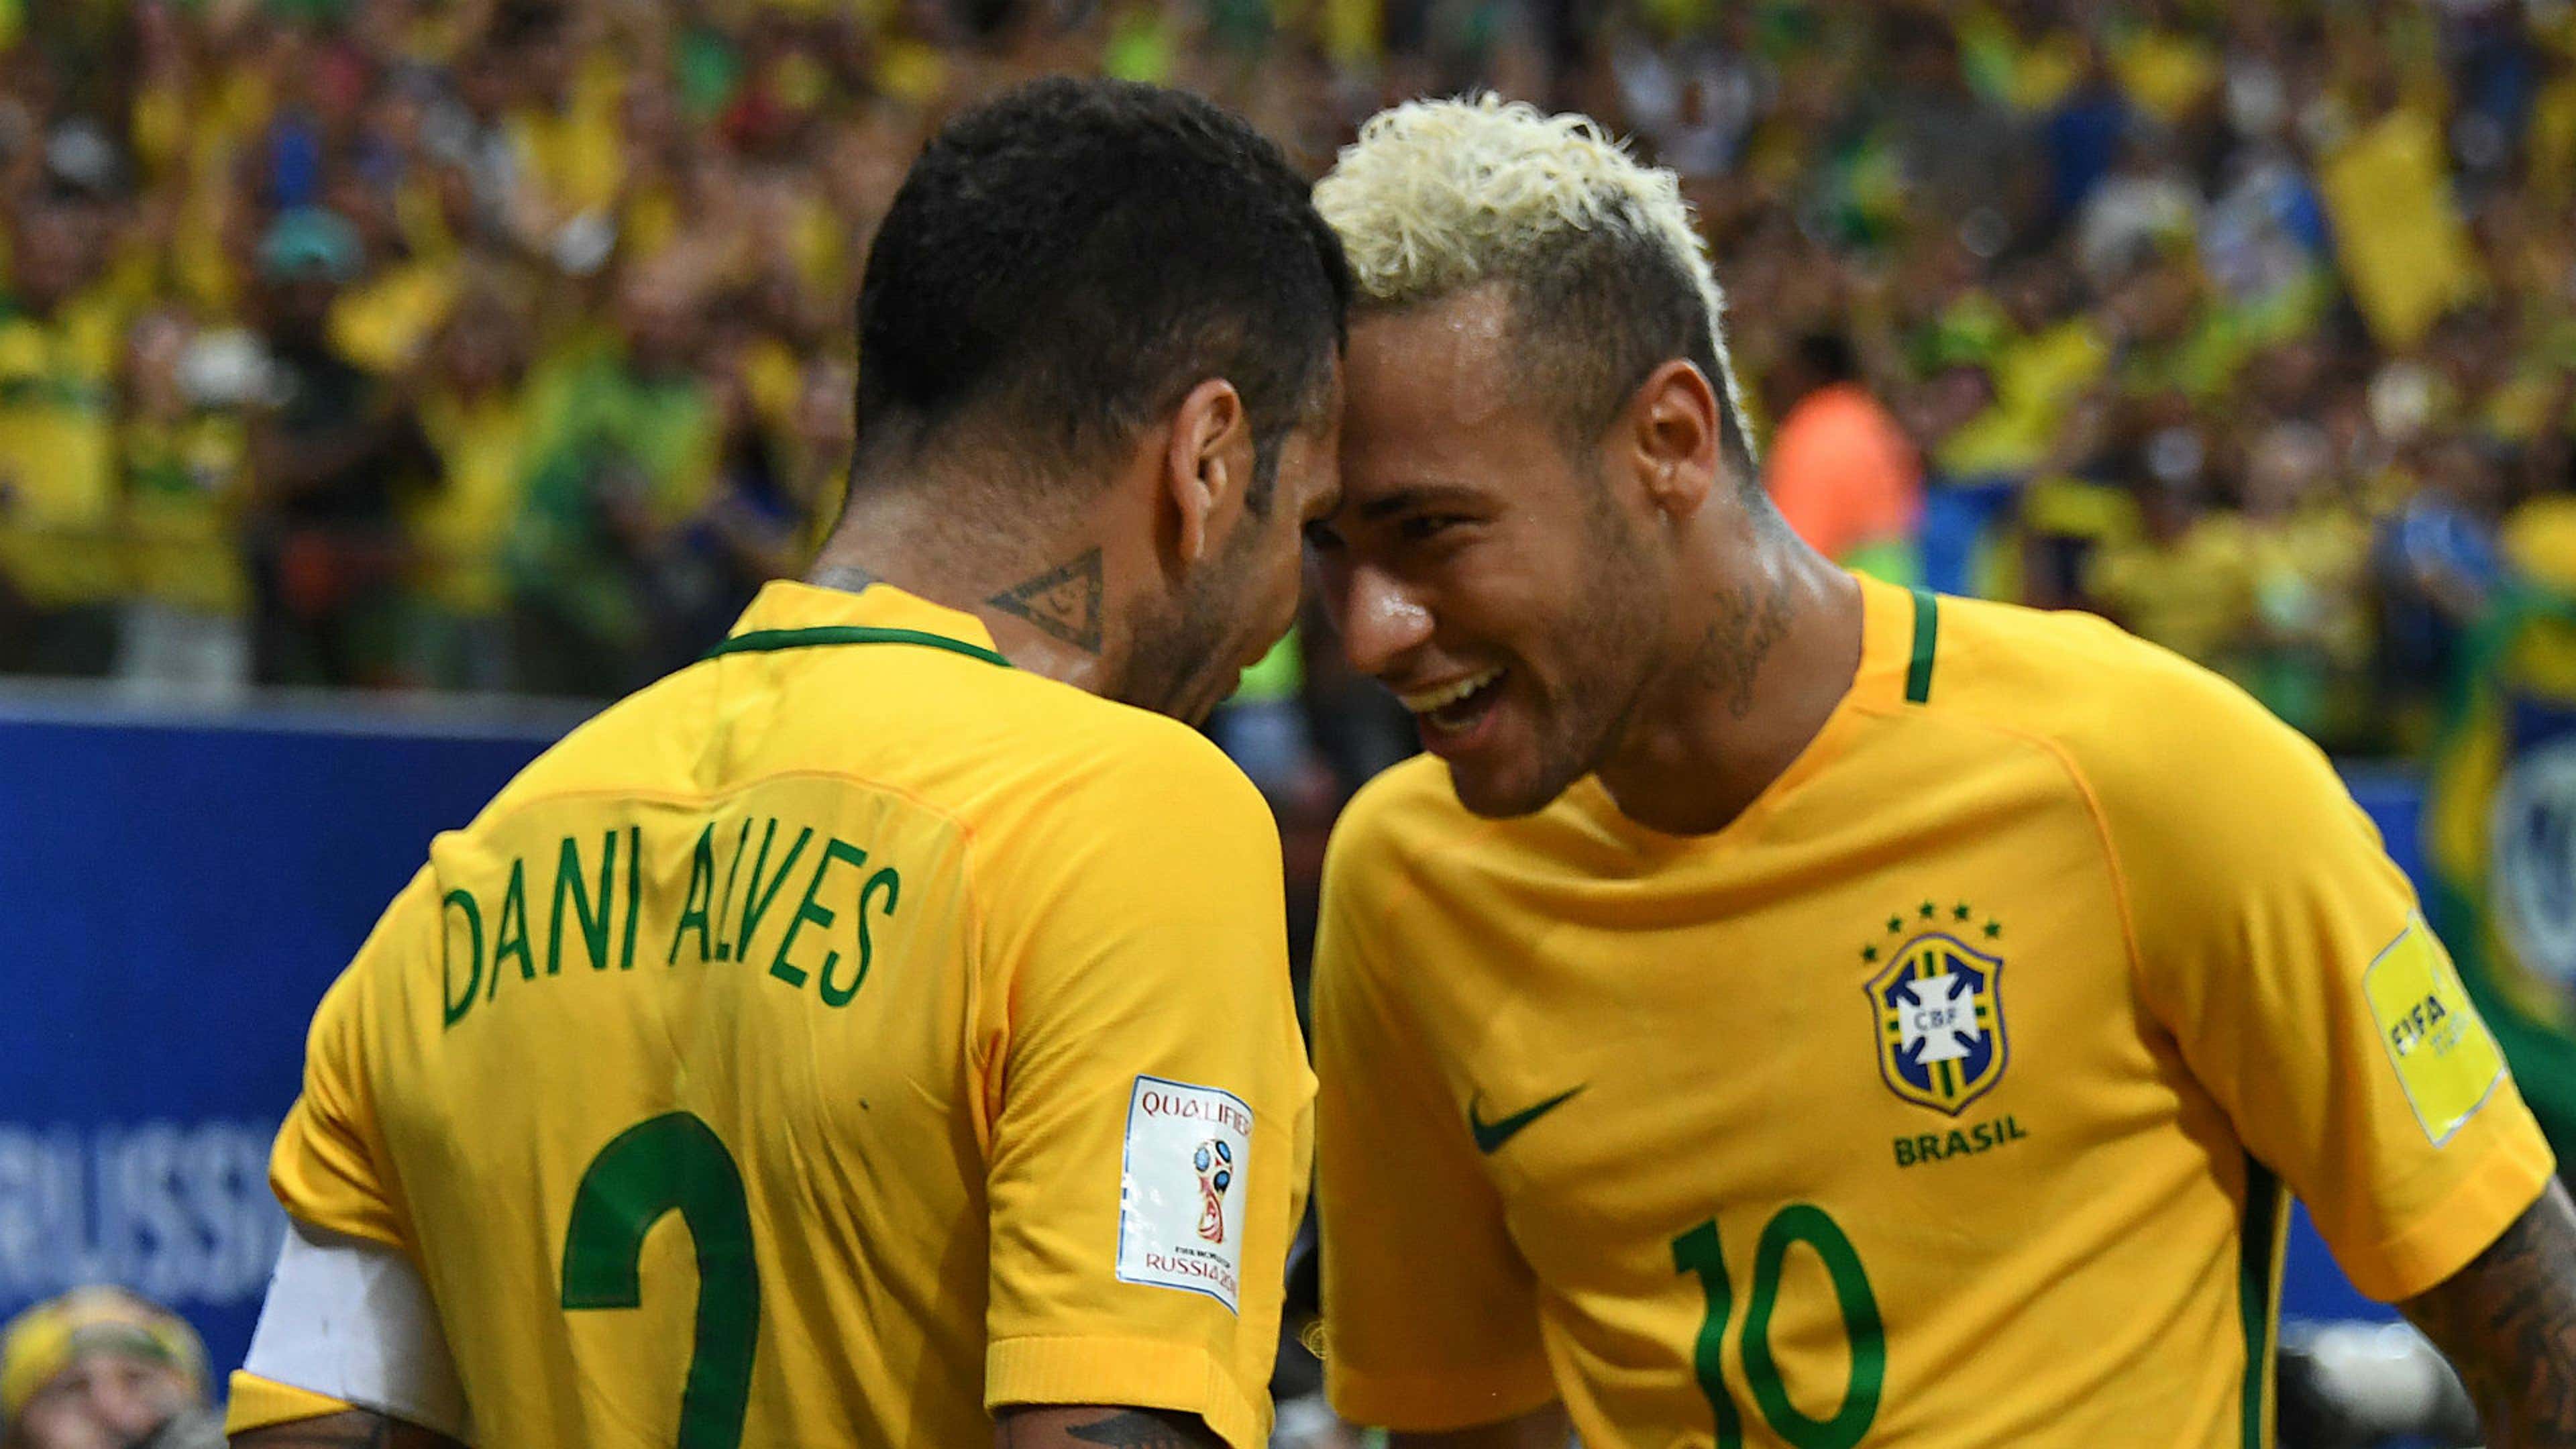 Neymar transfer news: Dani Alves offers angry response to claims he is trying to talk fellow Brazilian into PSG move | Goal.com United Arab Emirates